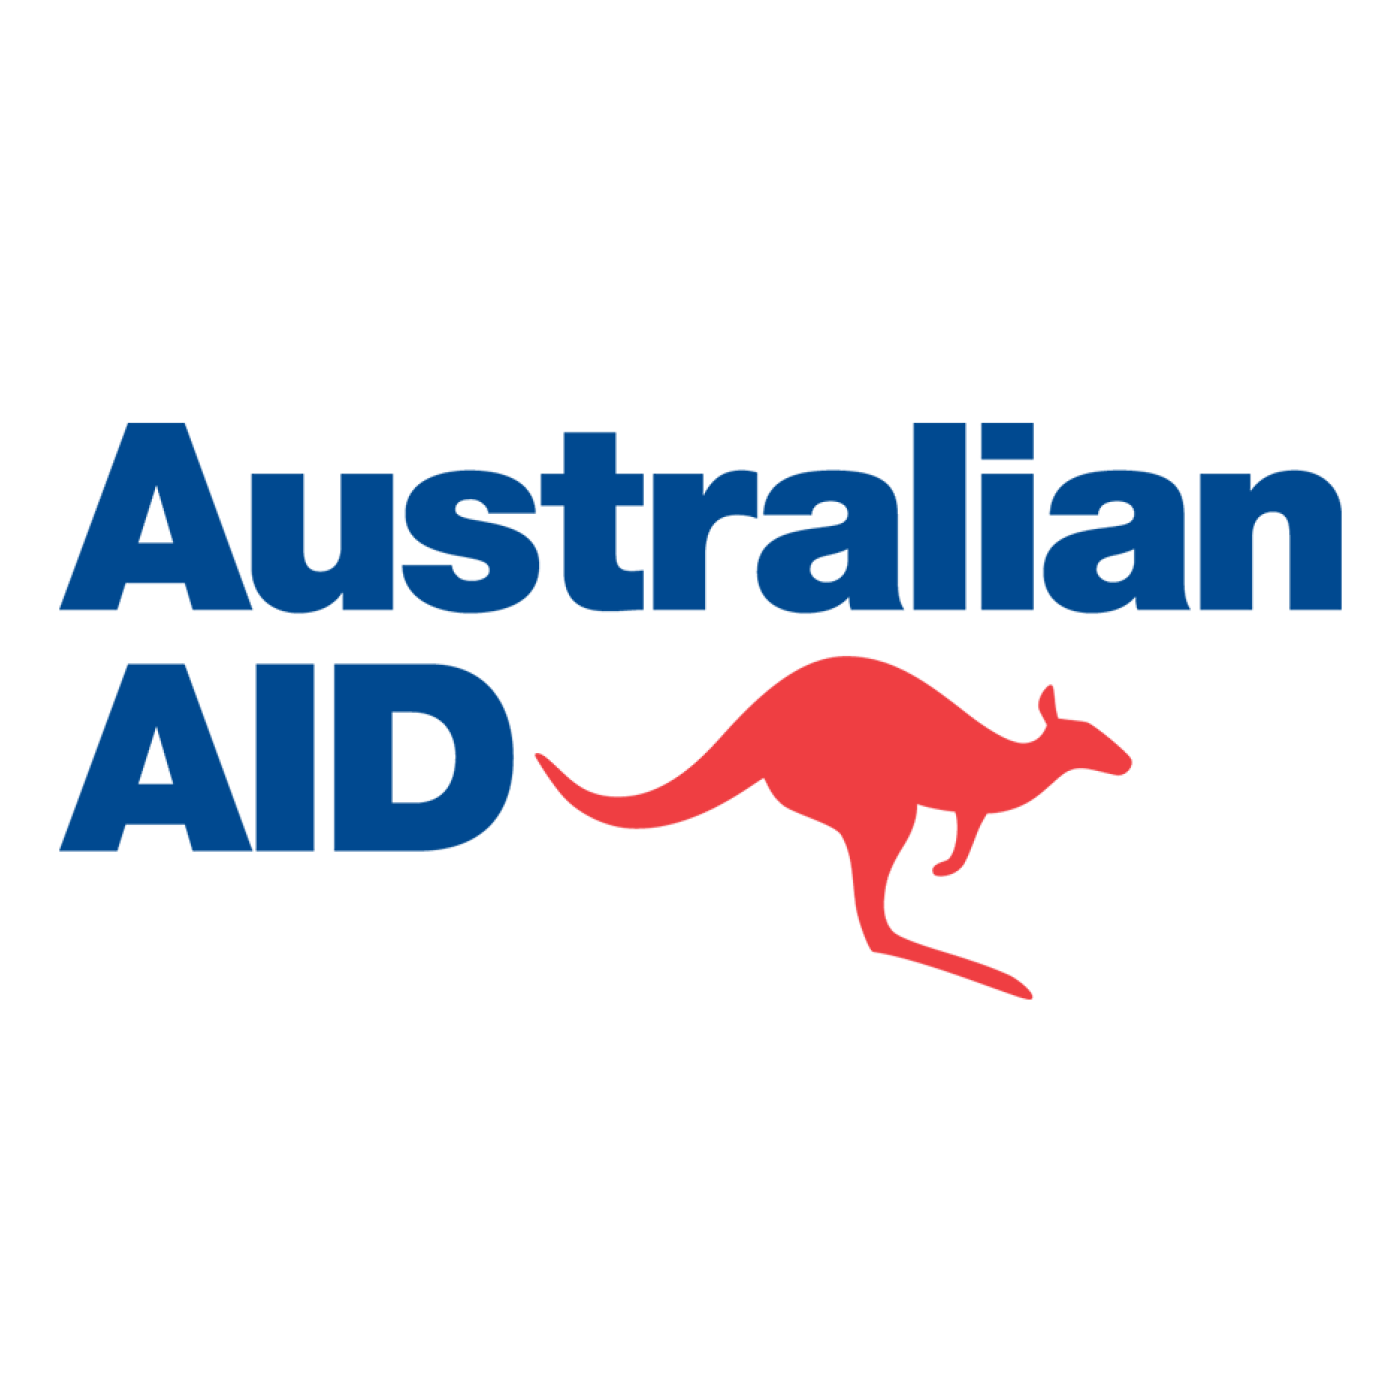 Australia Department of Foreign Affairs and Trade (DFAT) logo